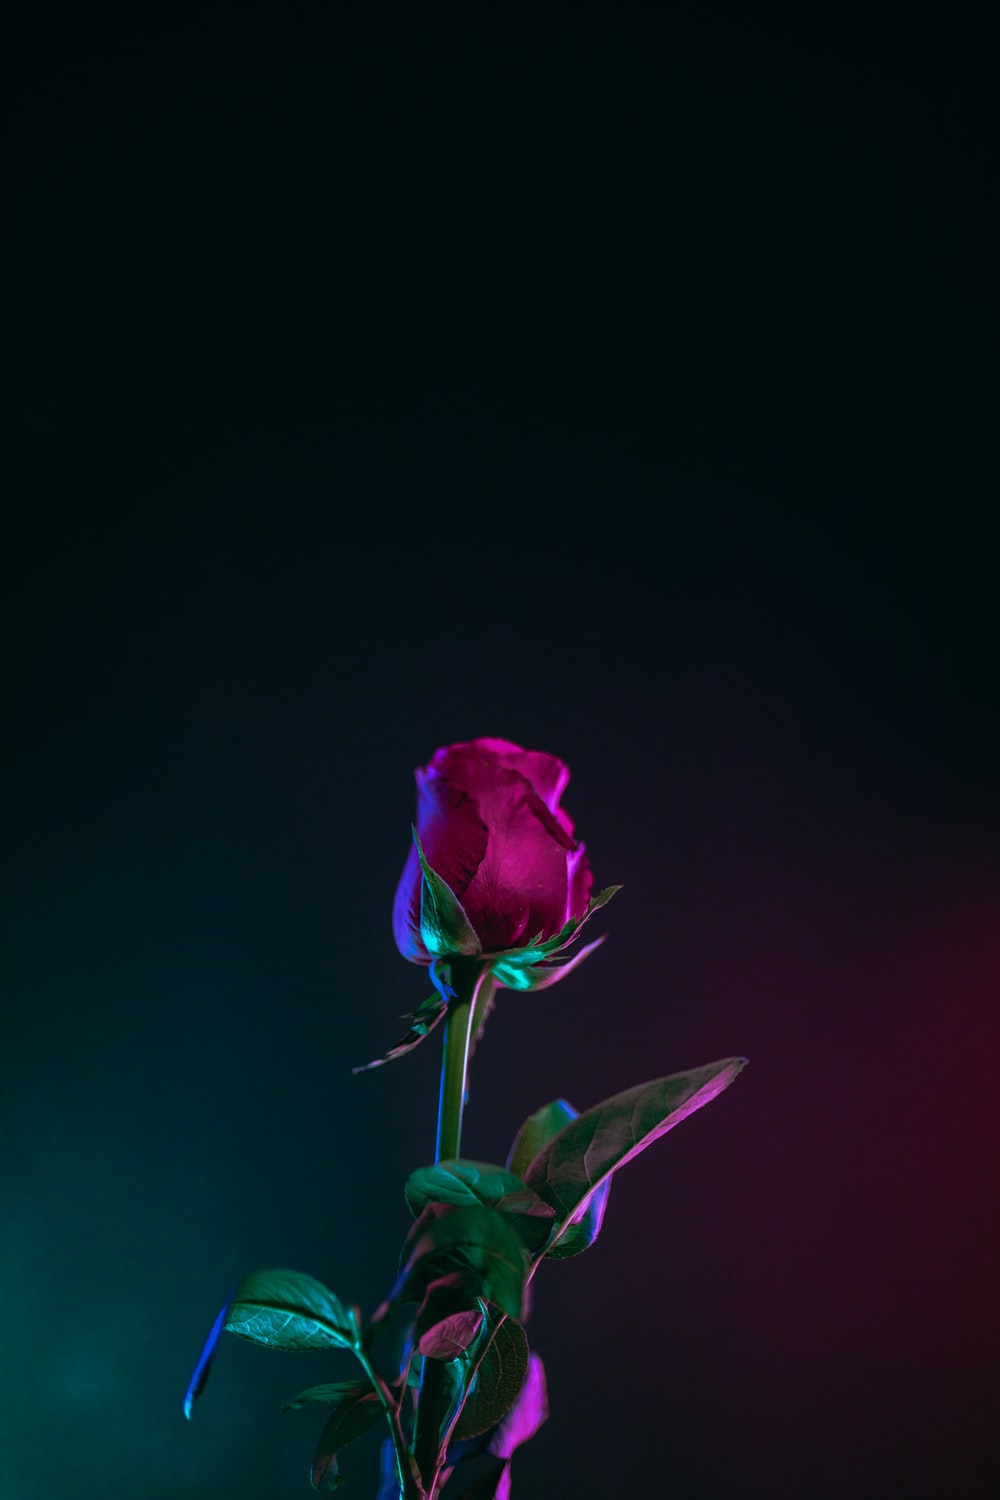 Rose In Black Background Picture. Download Free Image